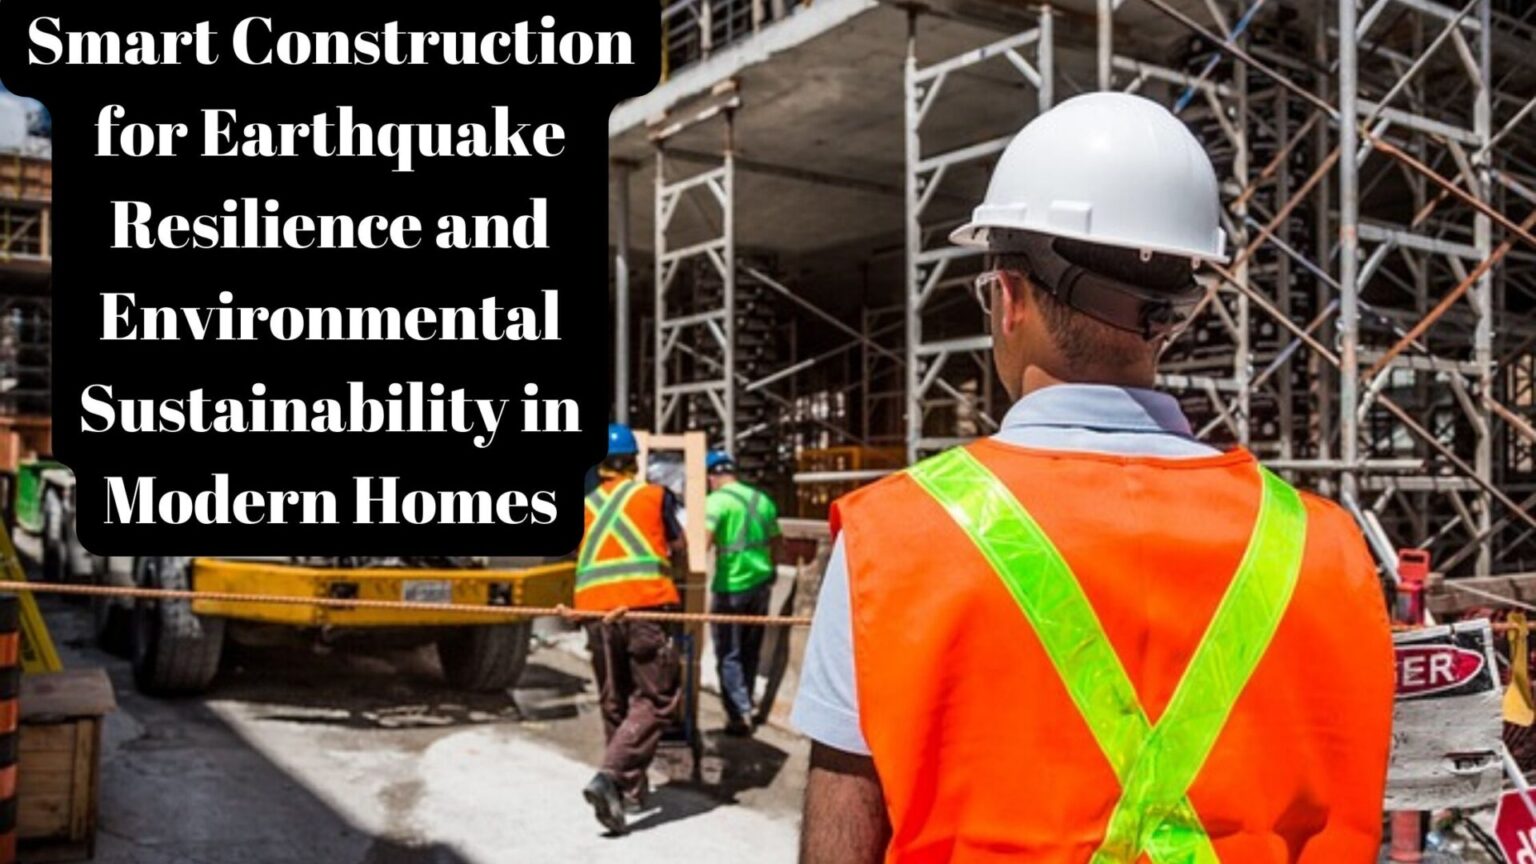 Smart Construction for Earthquake Resilience and Environmental Sustainability in Modern Homes